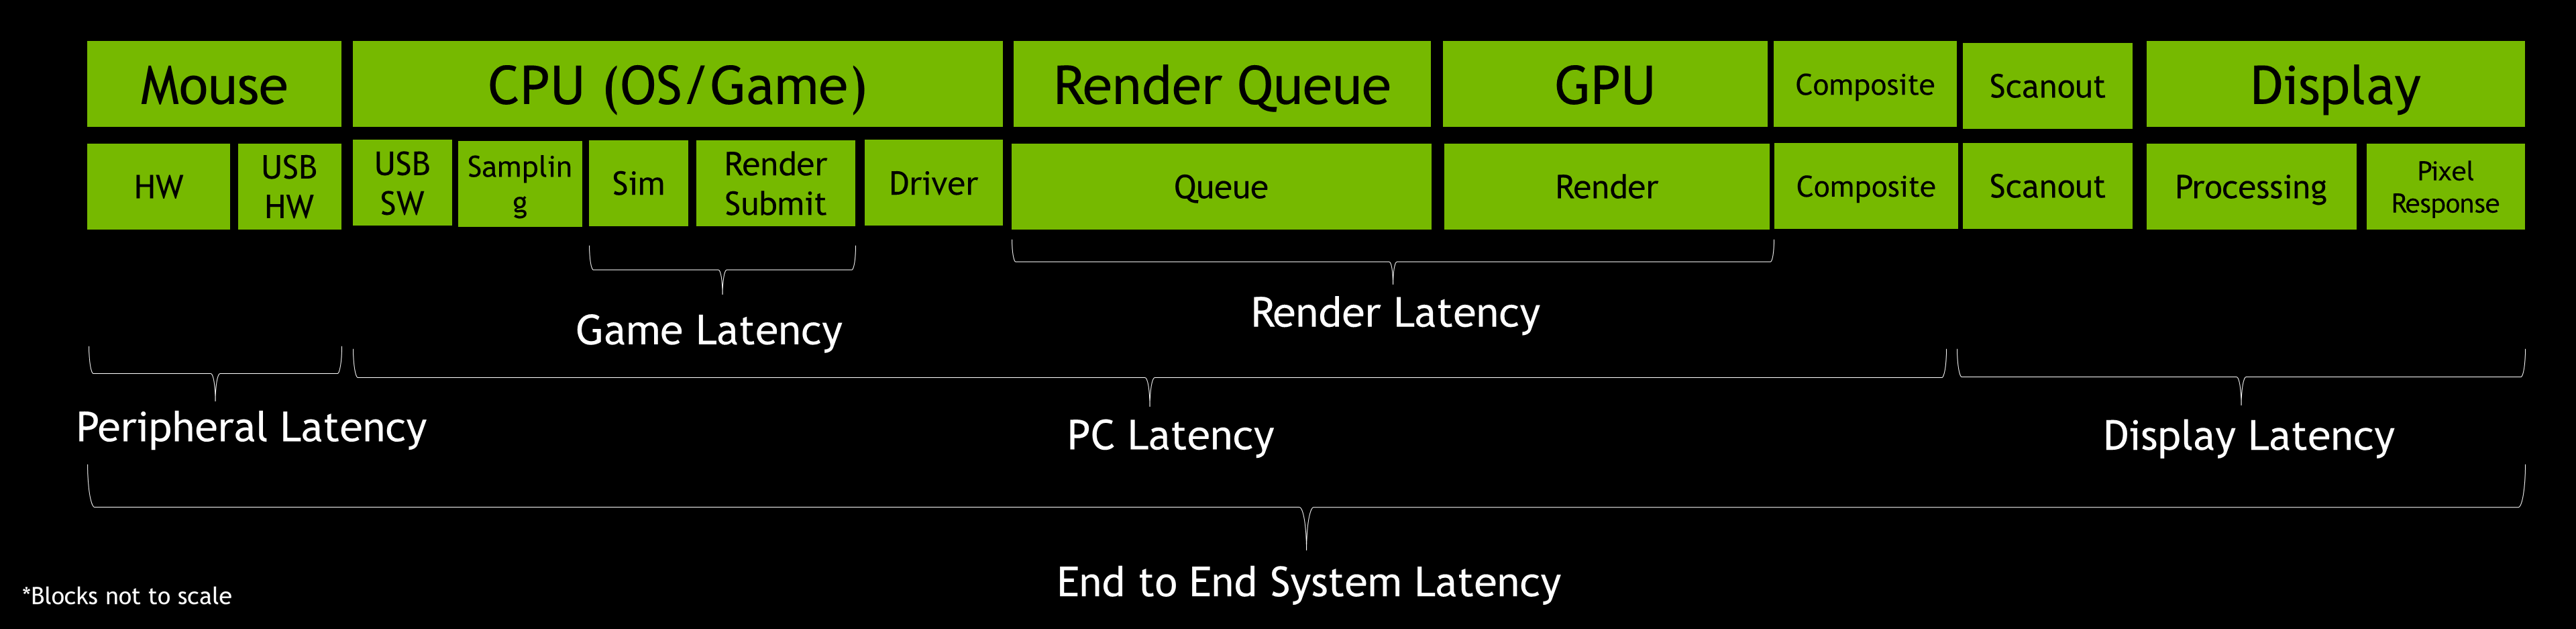 nvidia-reflex-end-to-end-systeme-latency-pipline.png